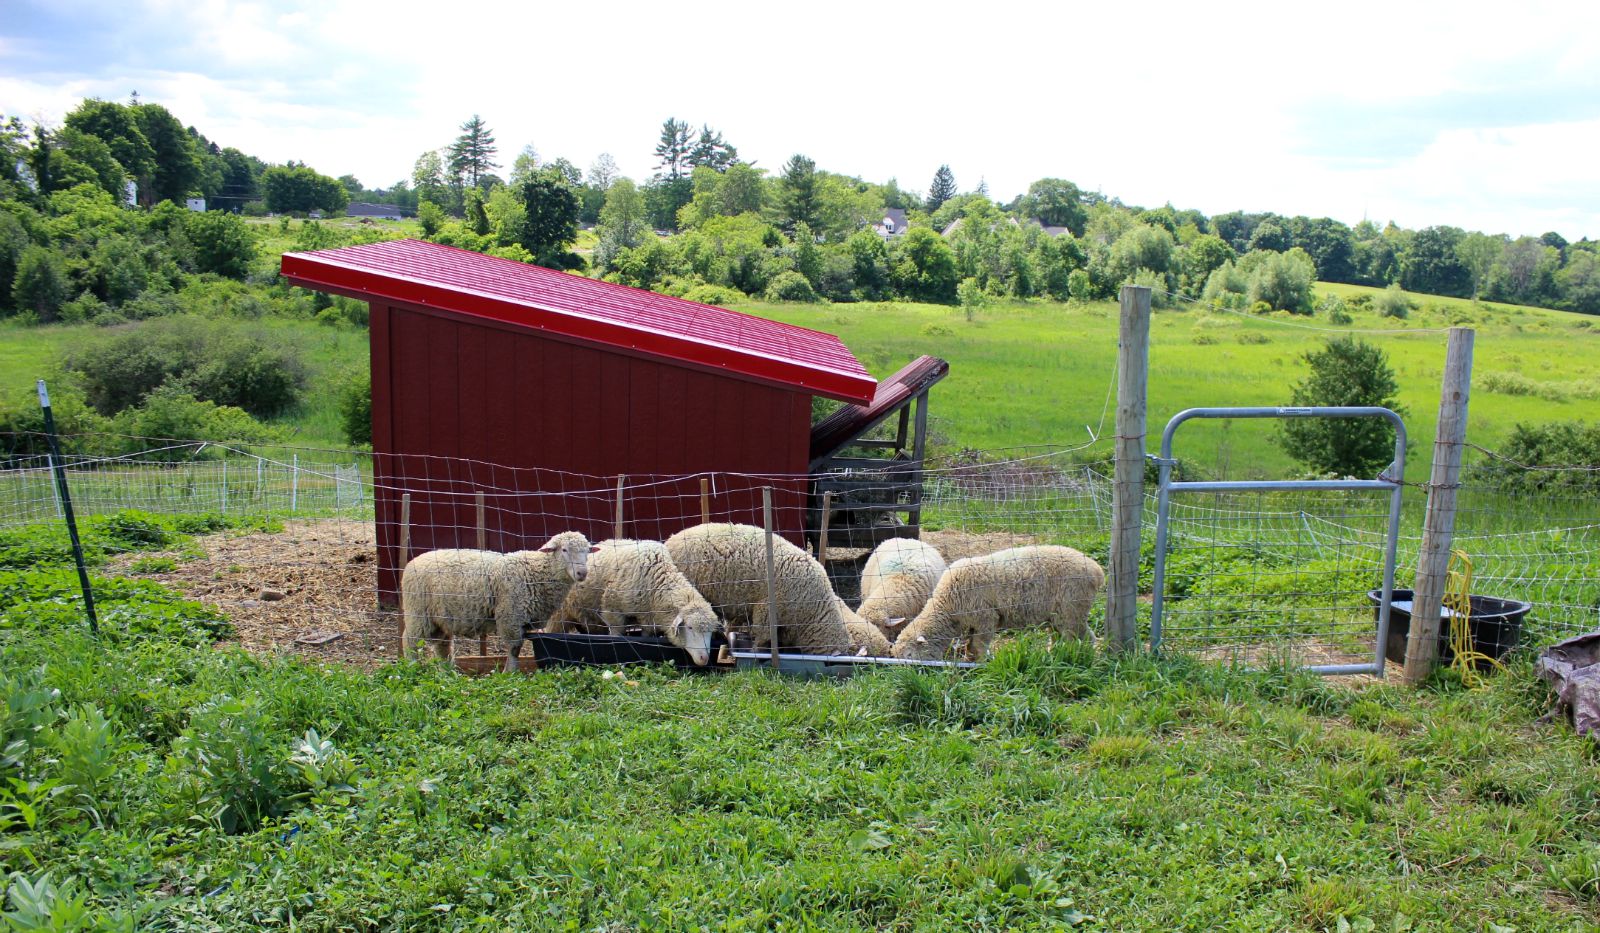 6 Lambs eating out of trough. 